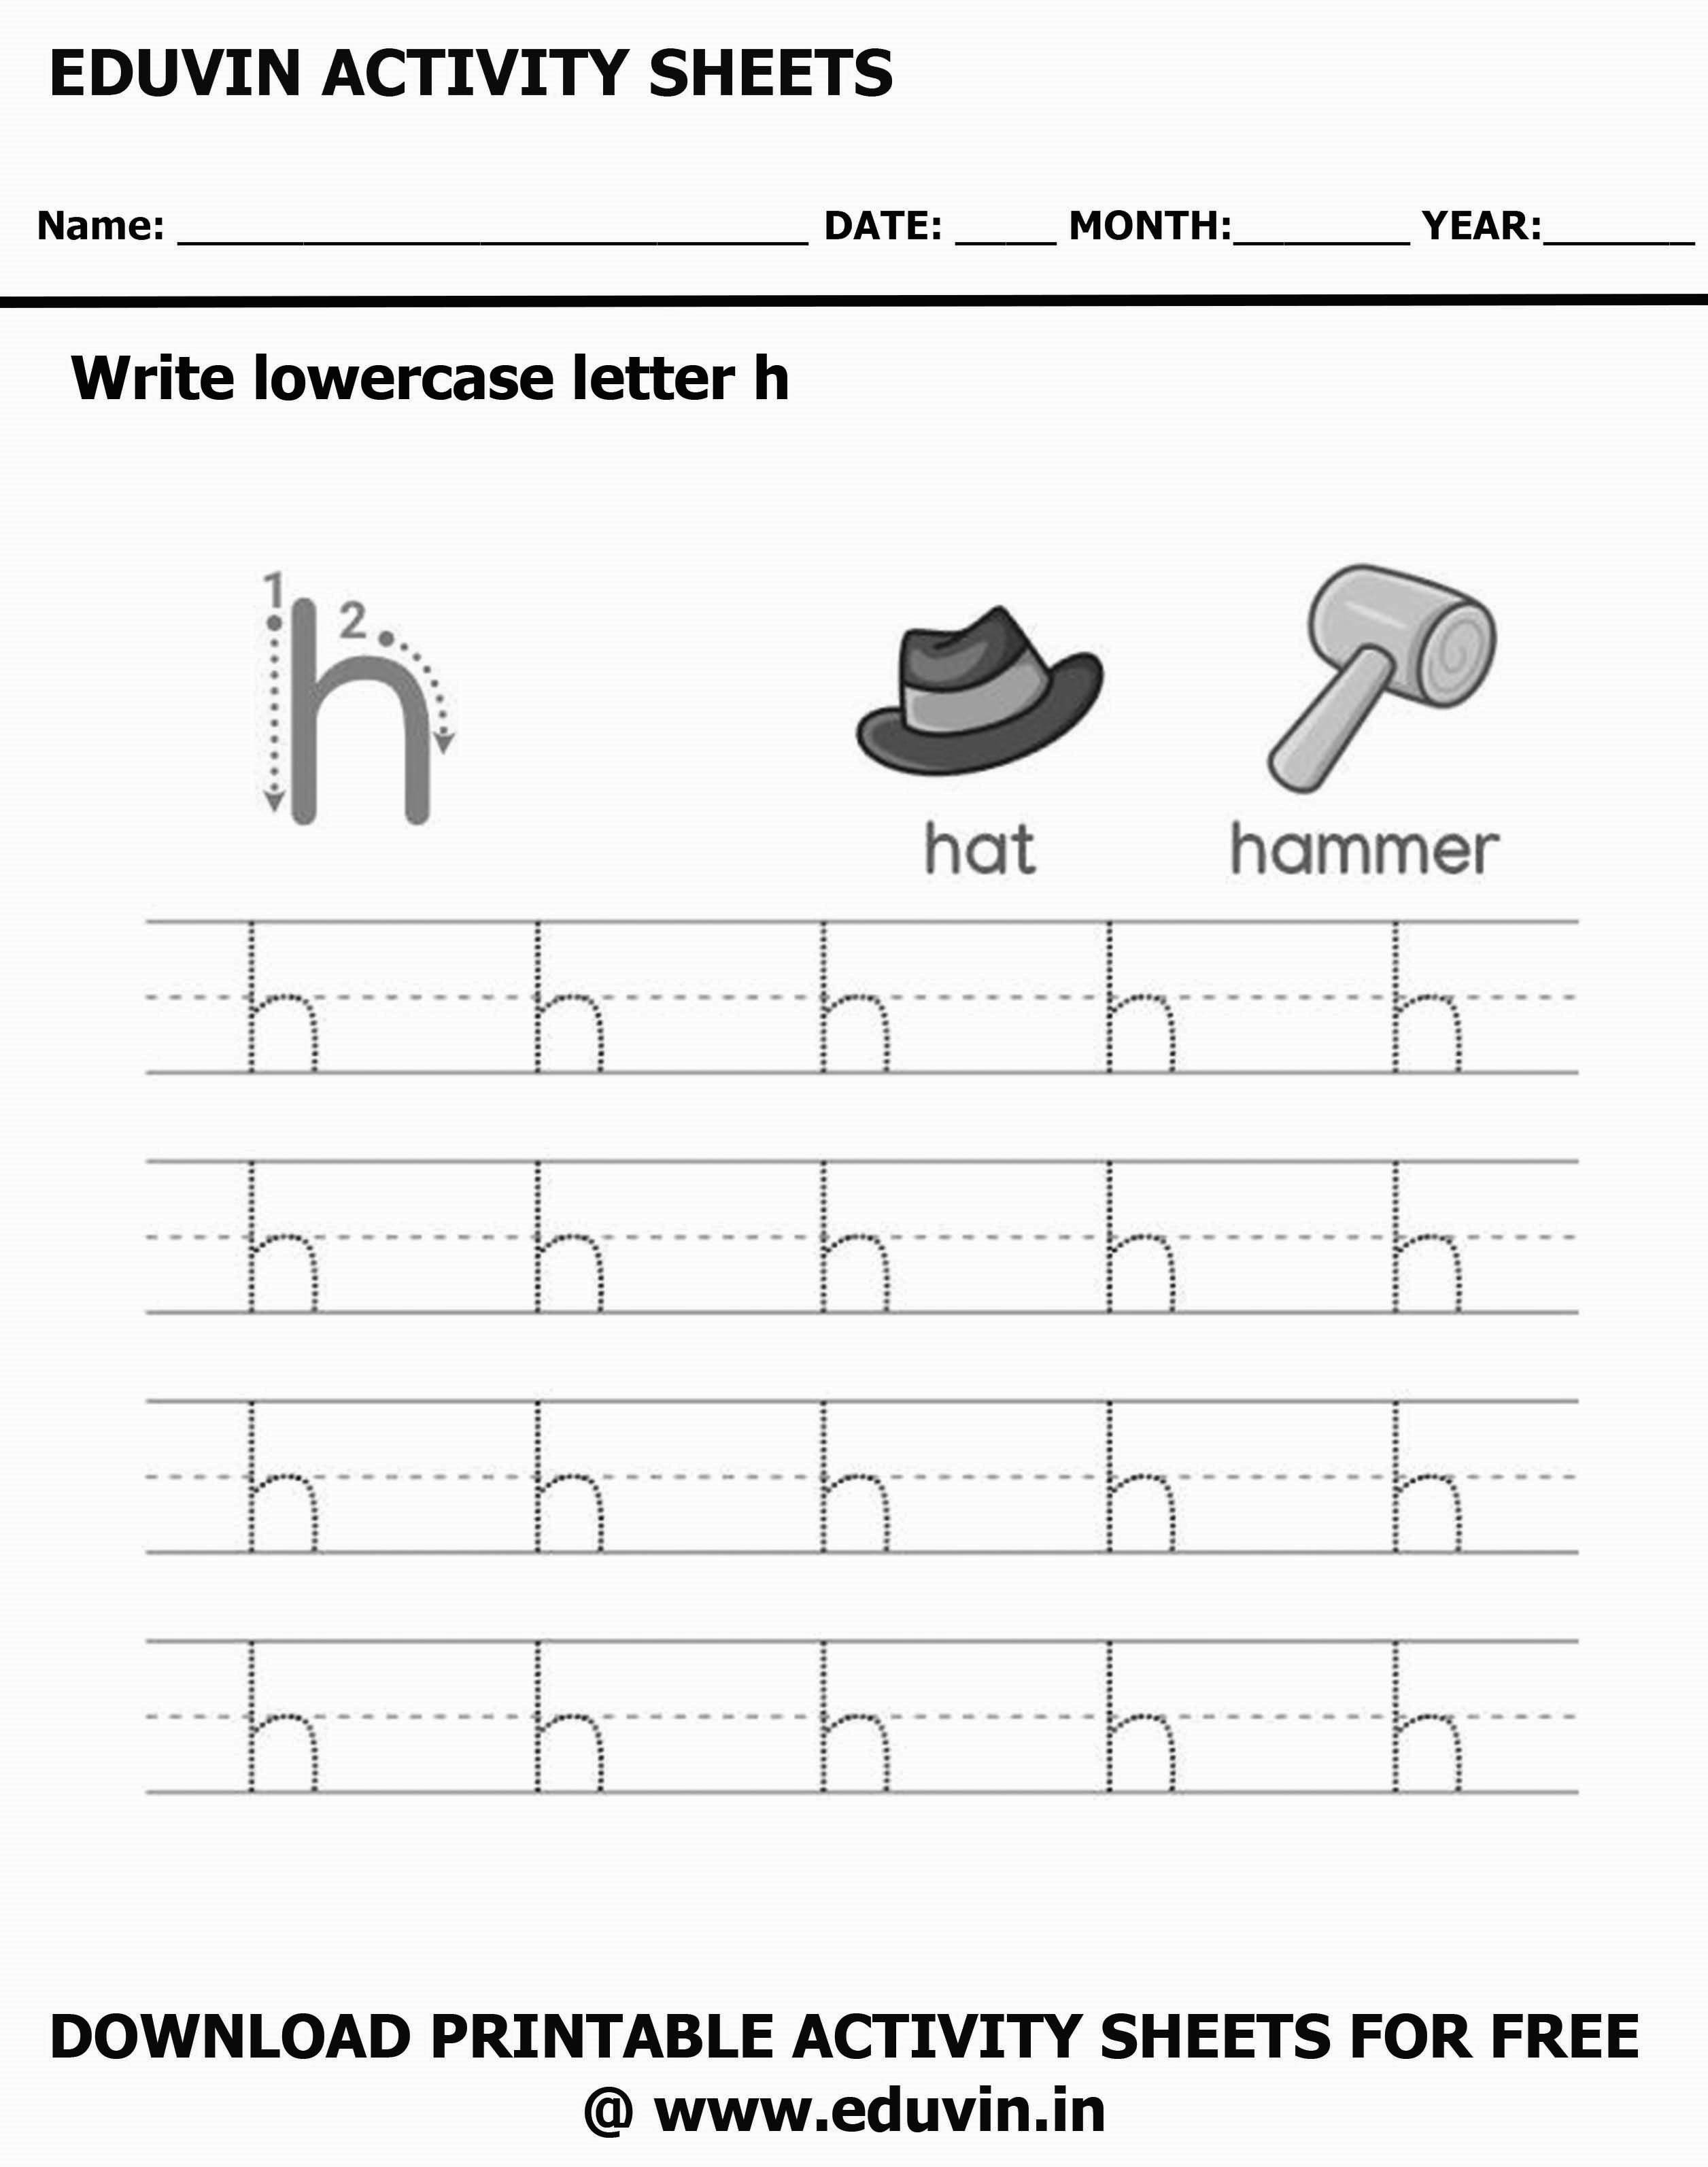 Lowercase Alphabet h Worksheets | Letter h Trace and Write Activity Sheet For Tracing and Letter Writing For Kids